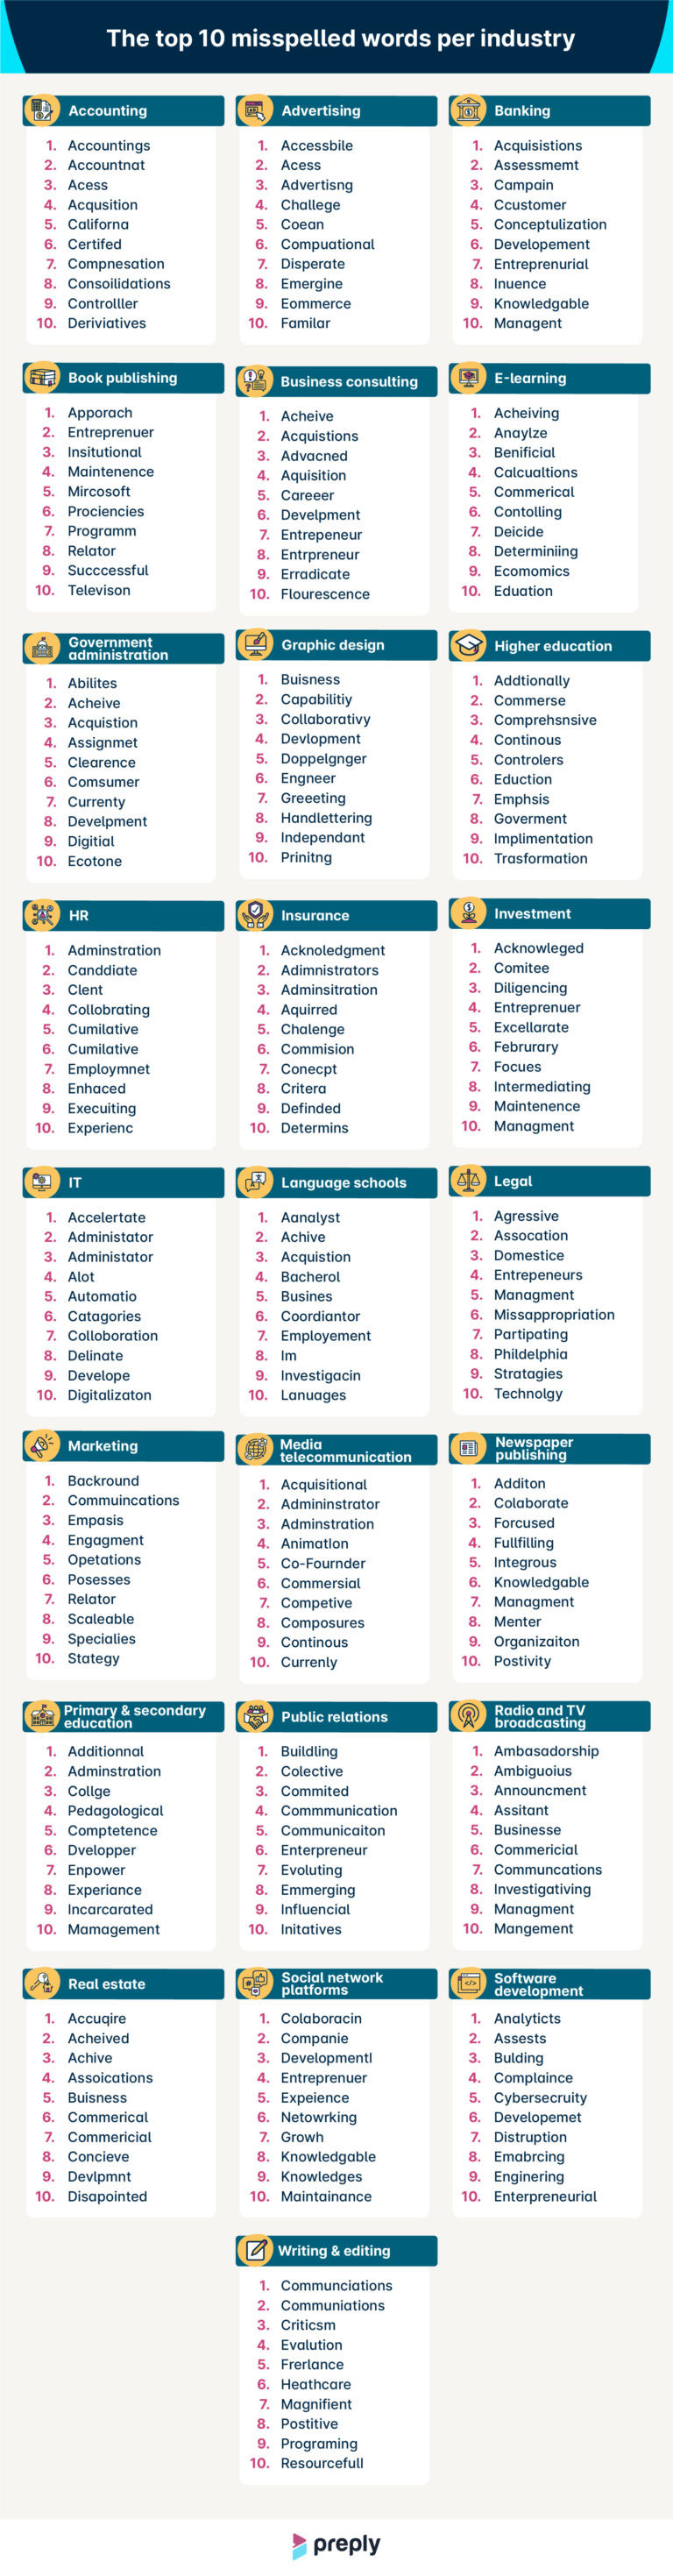 Infographic of commonly misspelled words in various industries